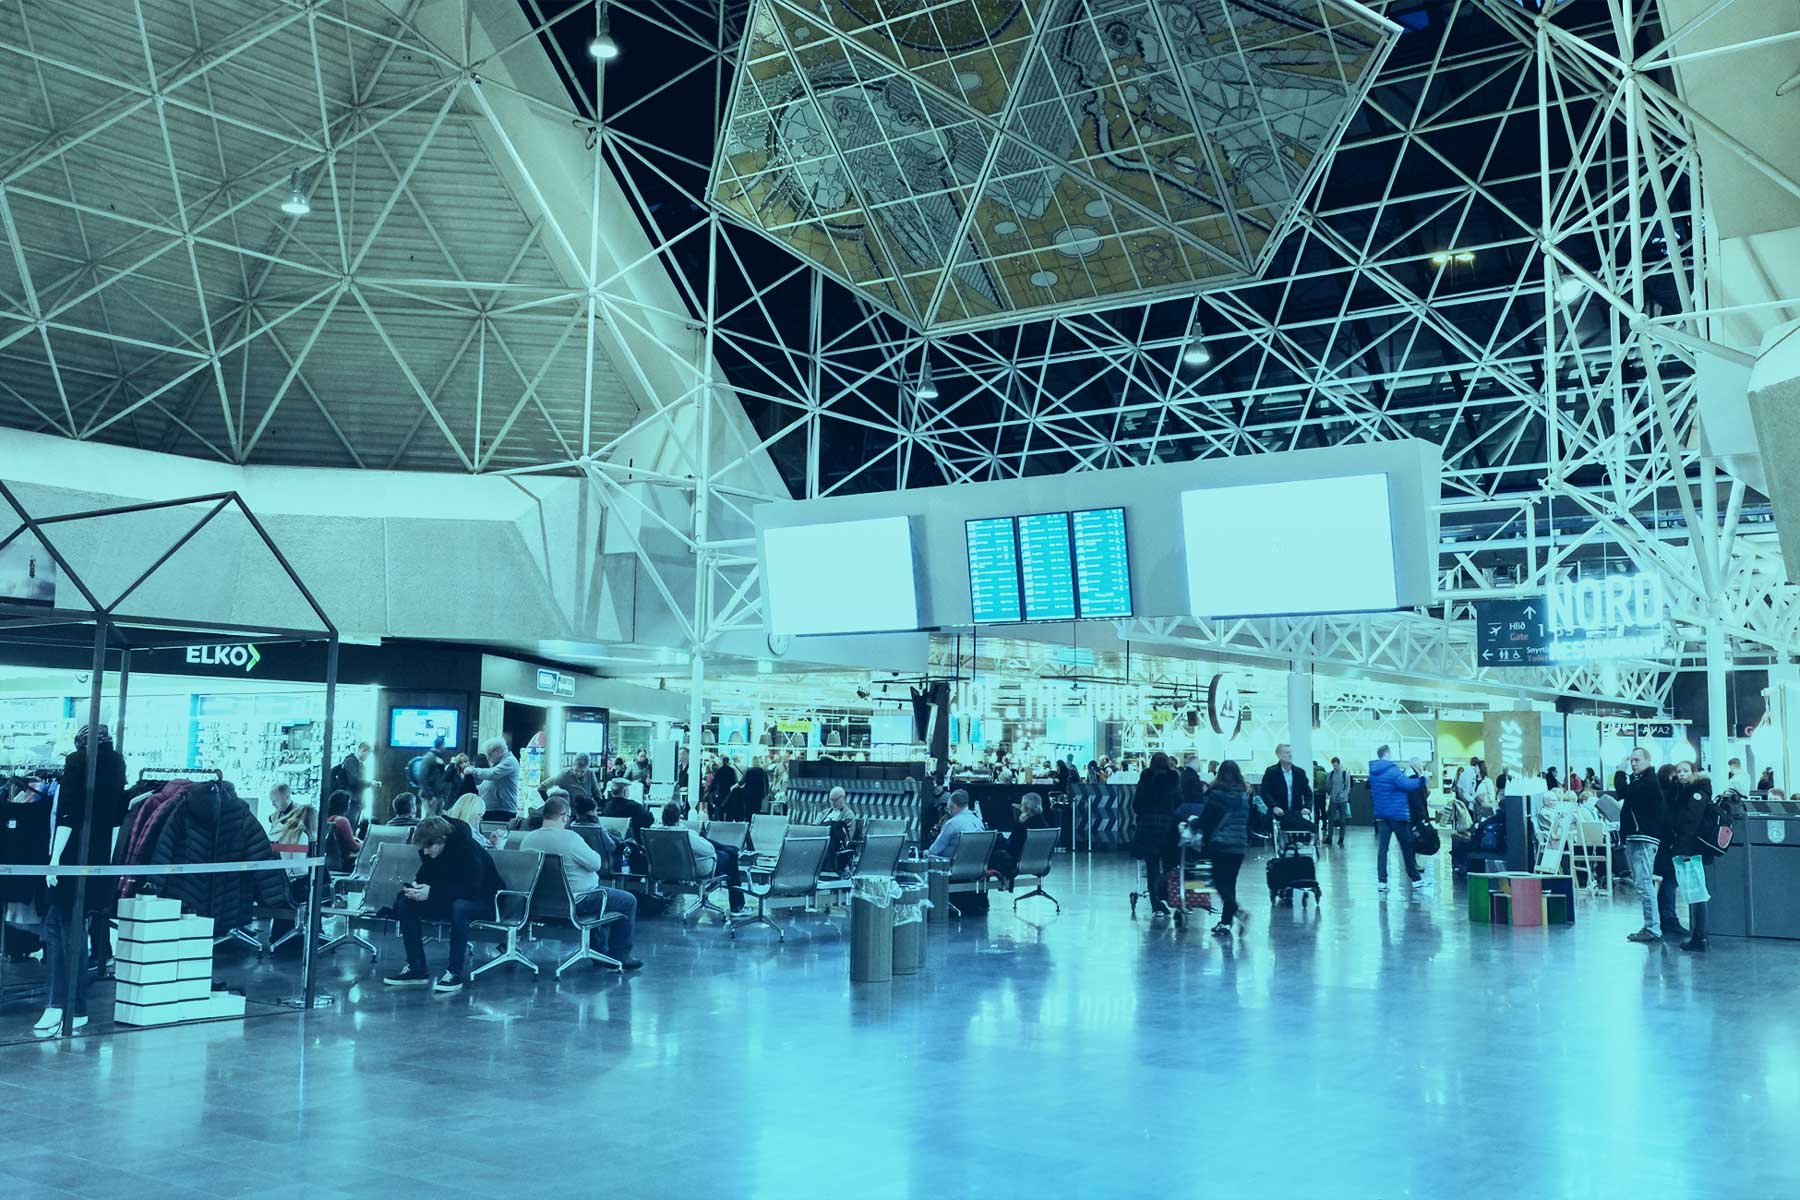 Keflavik Expands Veovo Solution for Airport-wide Passenger Flow Visibility to Ensure Smooth Travel